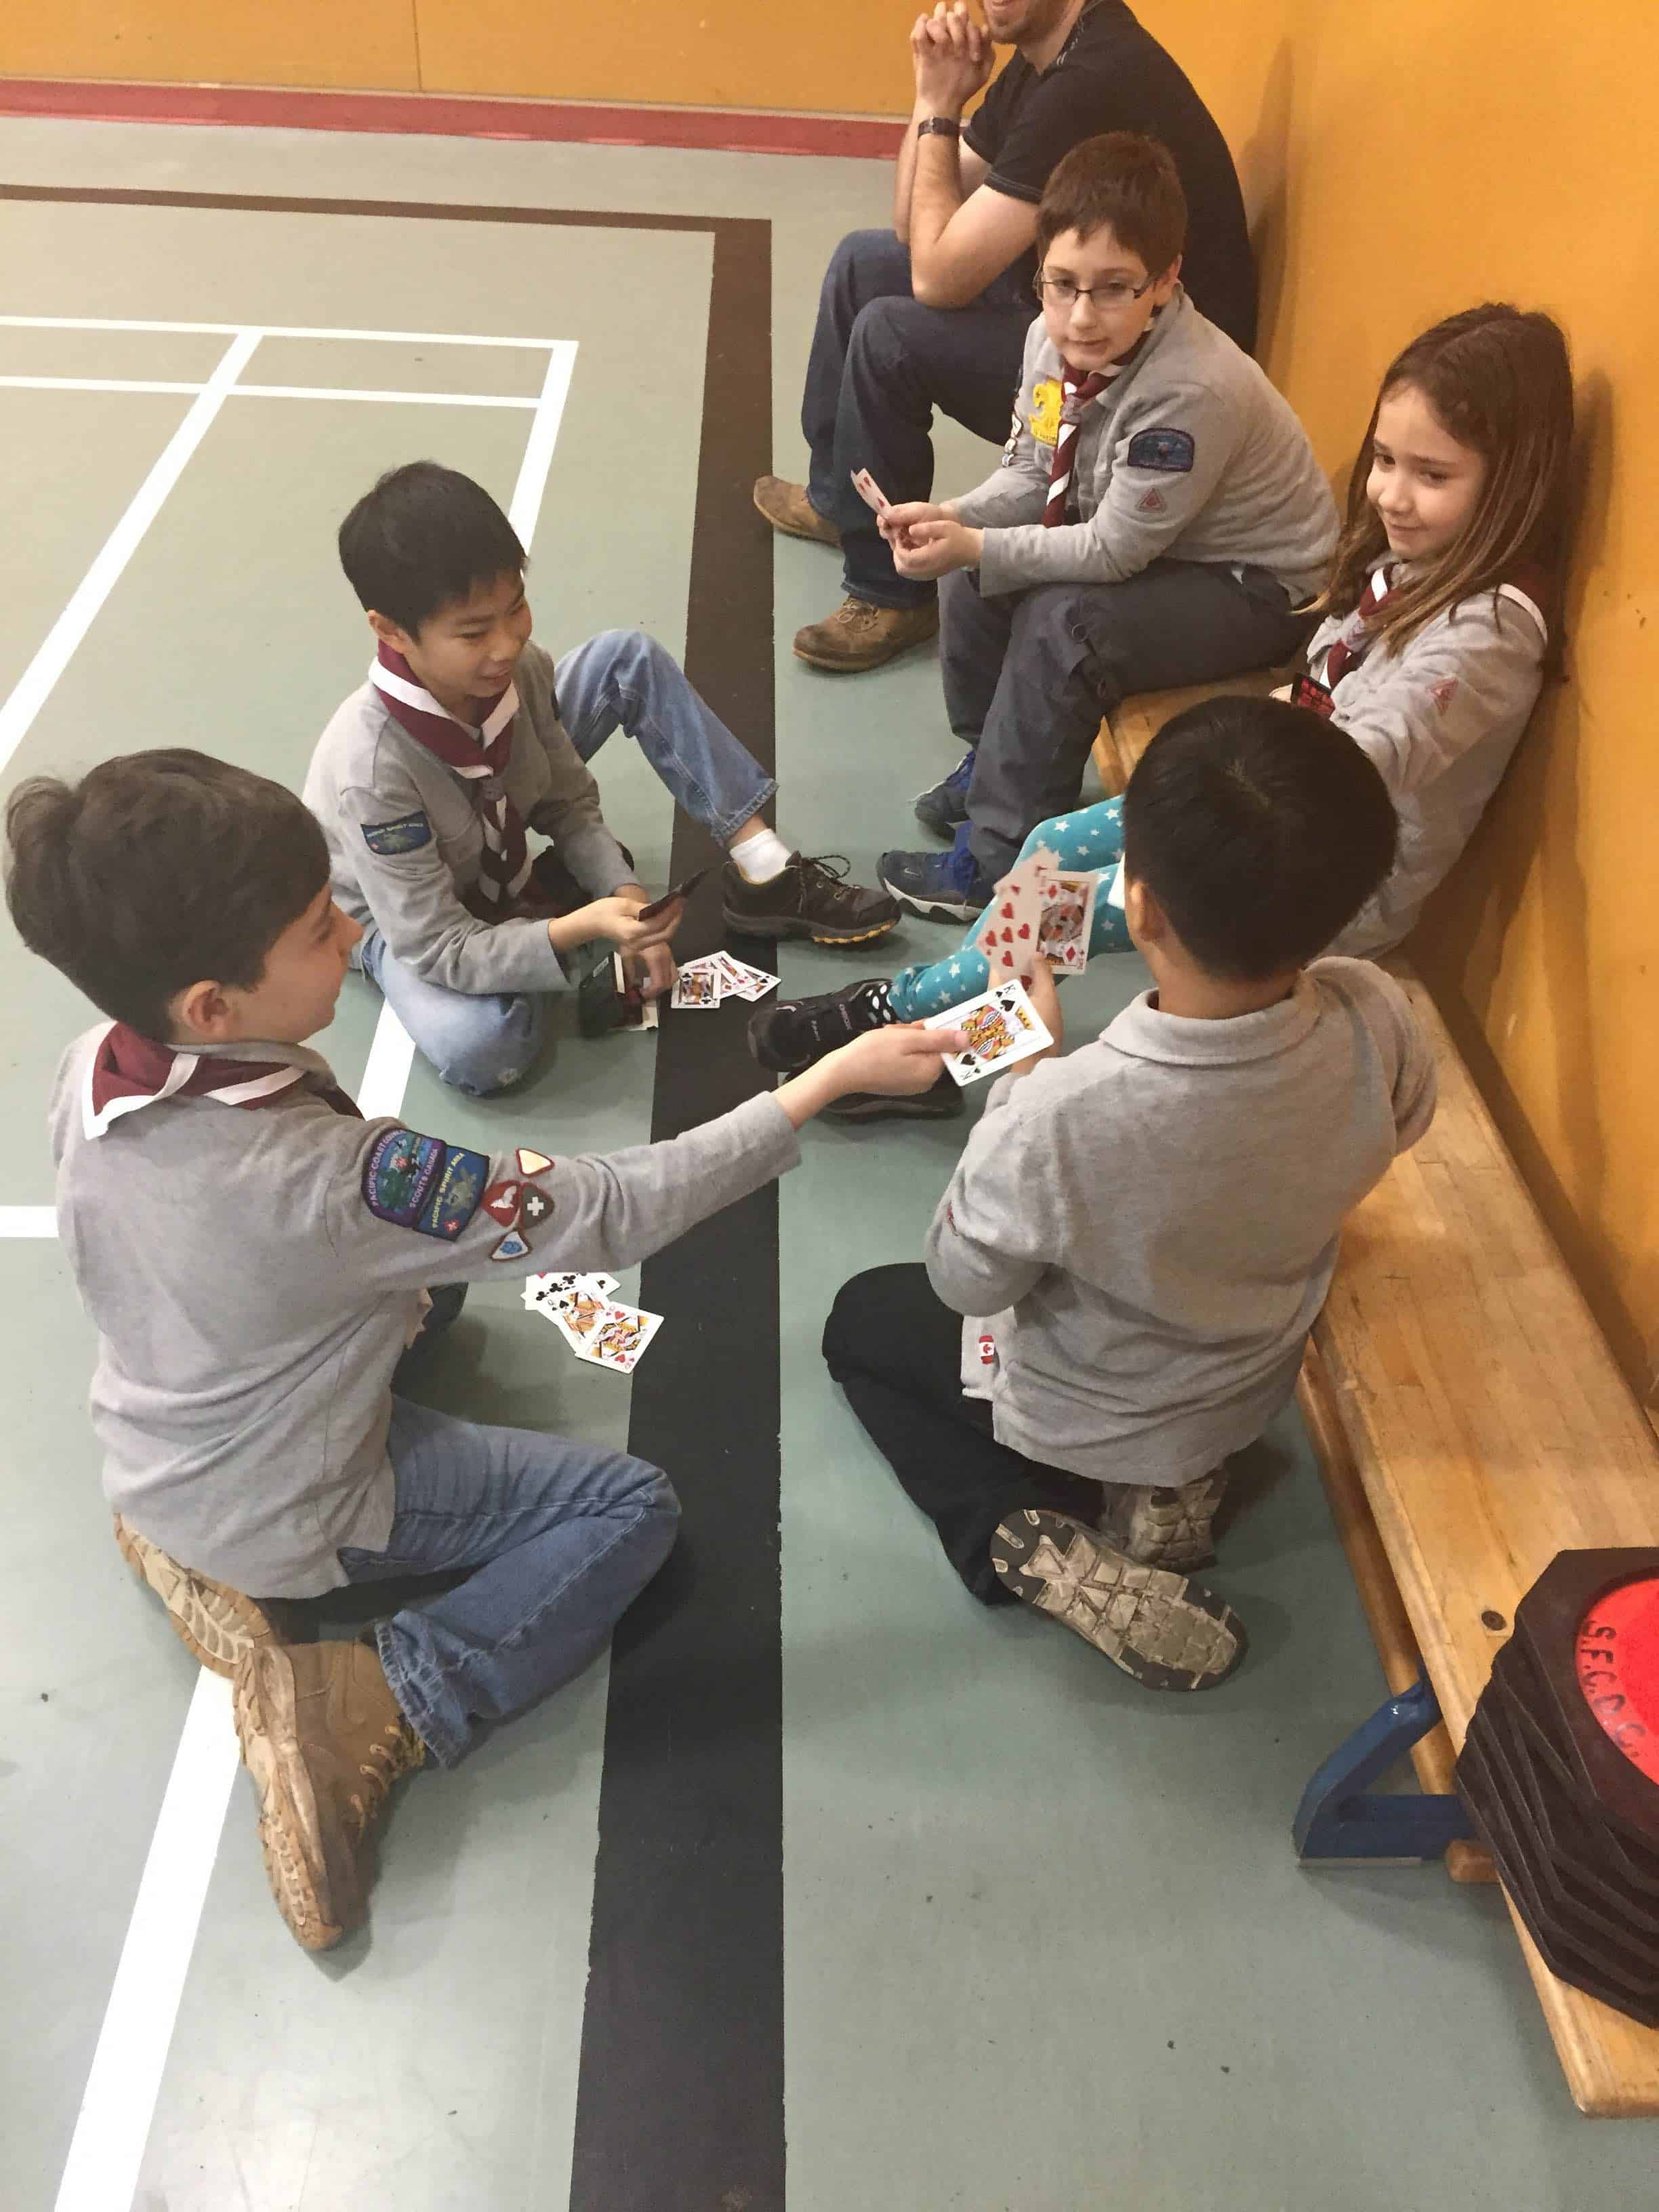 Youth Today - Cub Scouts Canada playing Cards